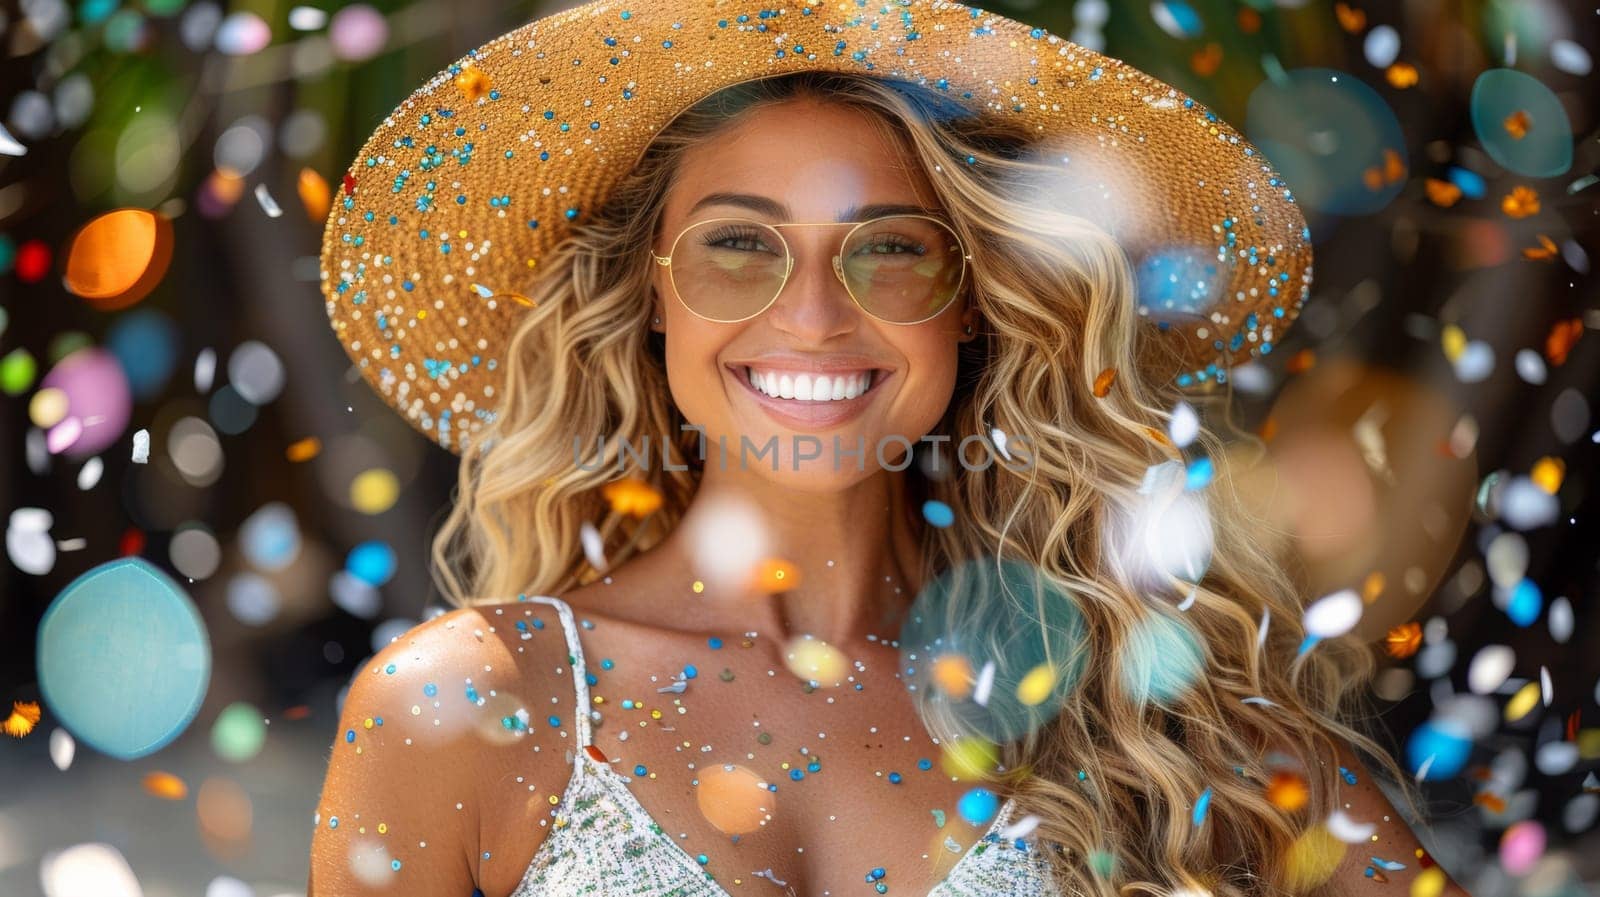 A woman in a hat and sunglasses smiling with confetti falling around her, AI by starush